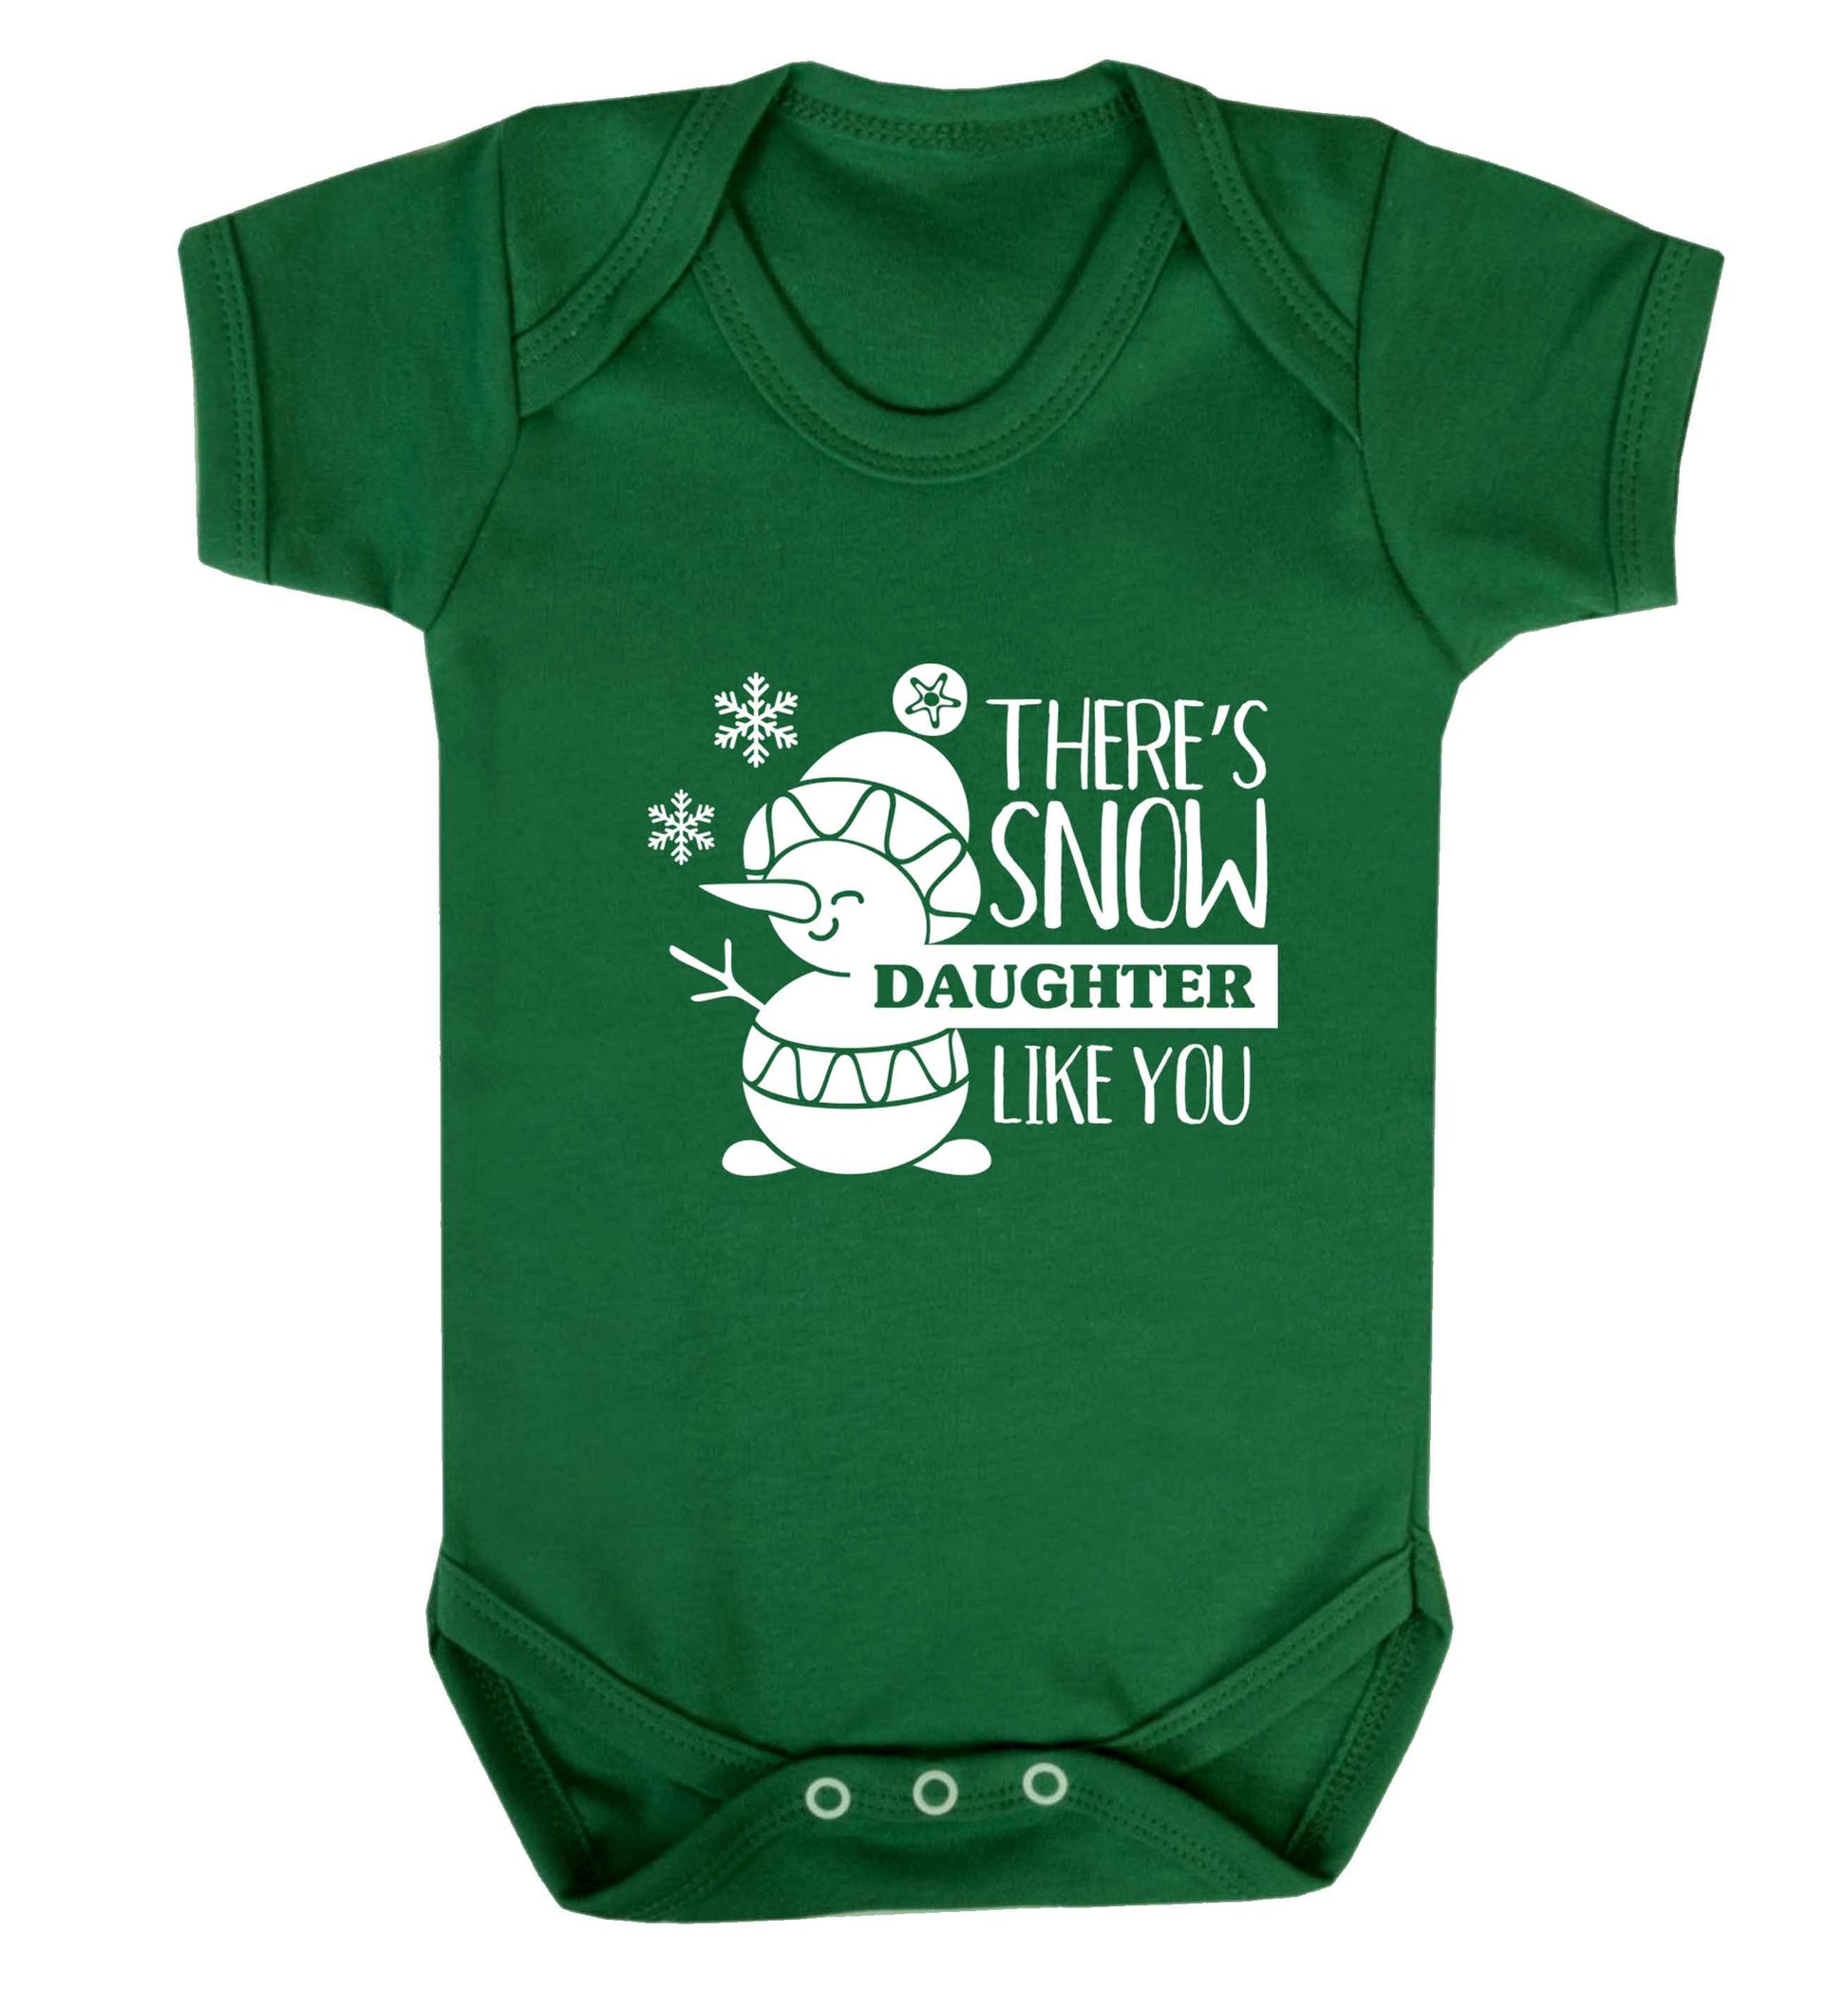 There's snow daughter like you baby vest green 18-24 months